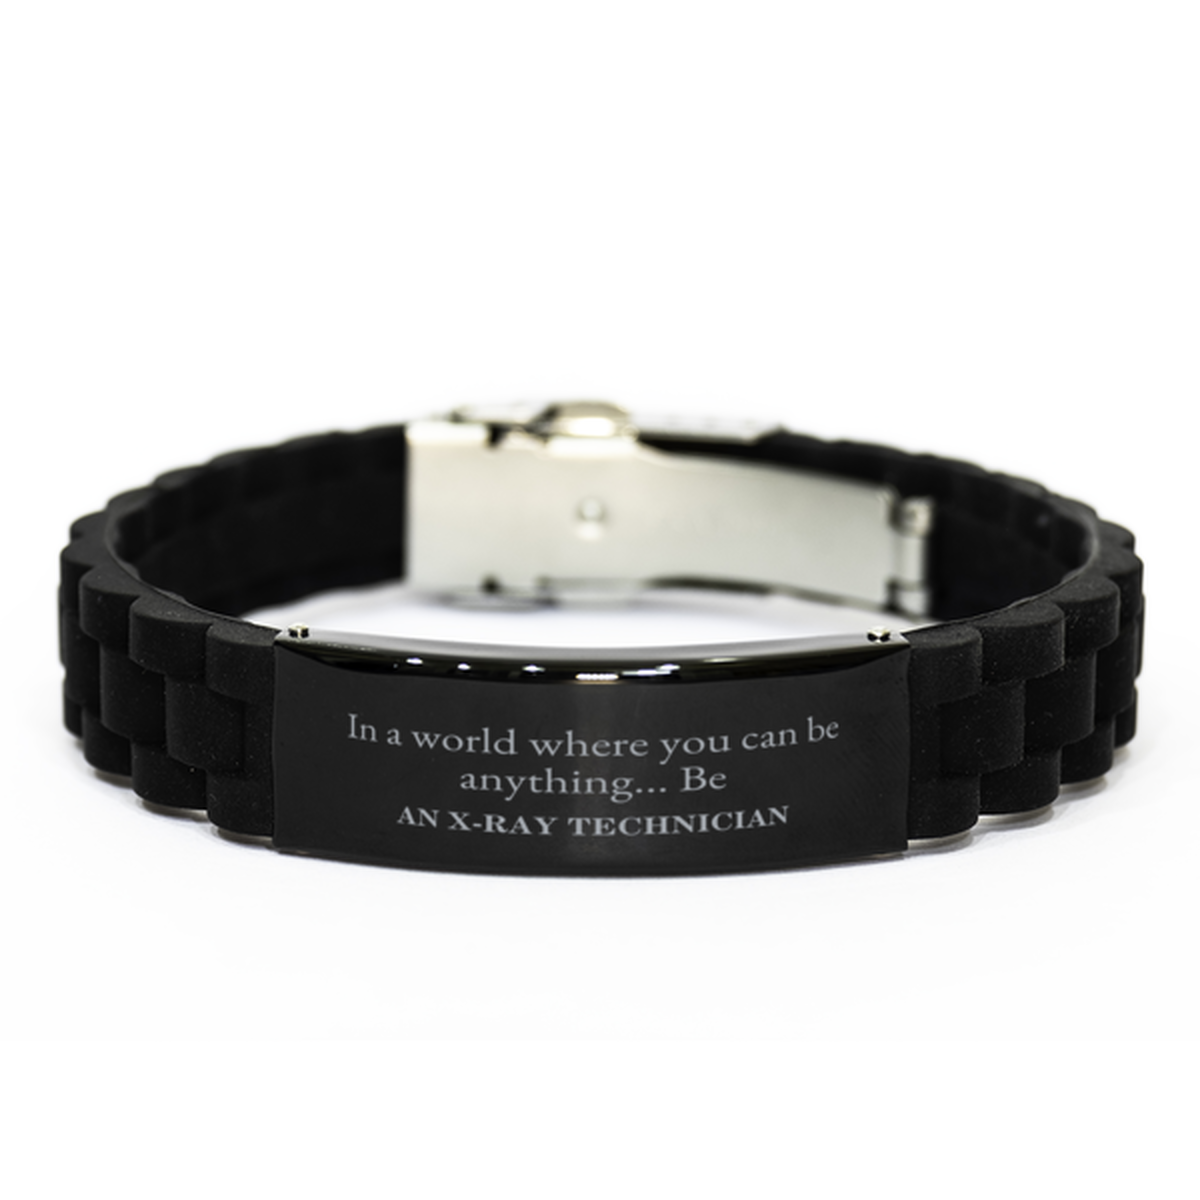 Gifts for X-Ray Technician, In a world where you can be anything, Appreciation Birthday Black Glidelock Clasp Bracelet for Men, Women, Friends, Coworkers